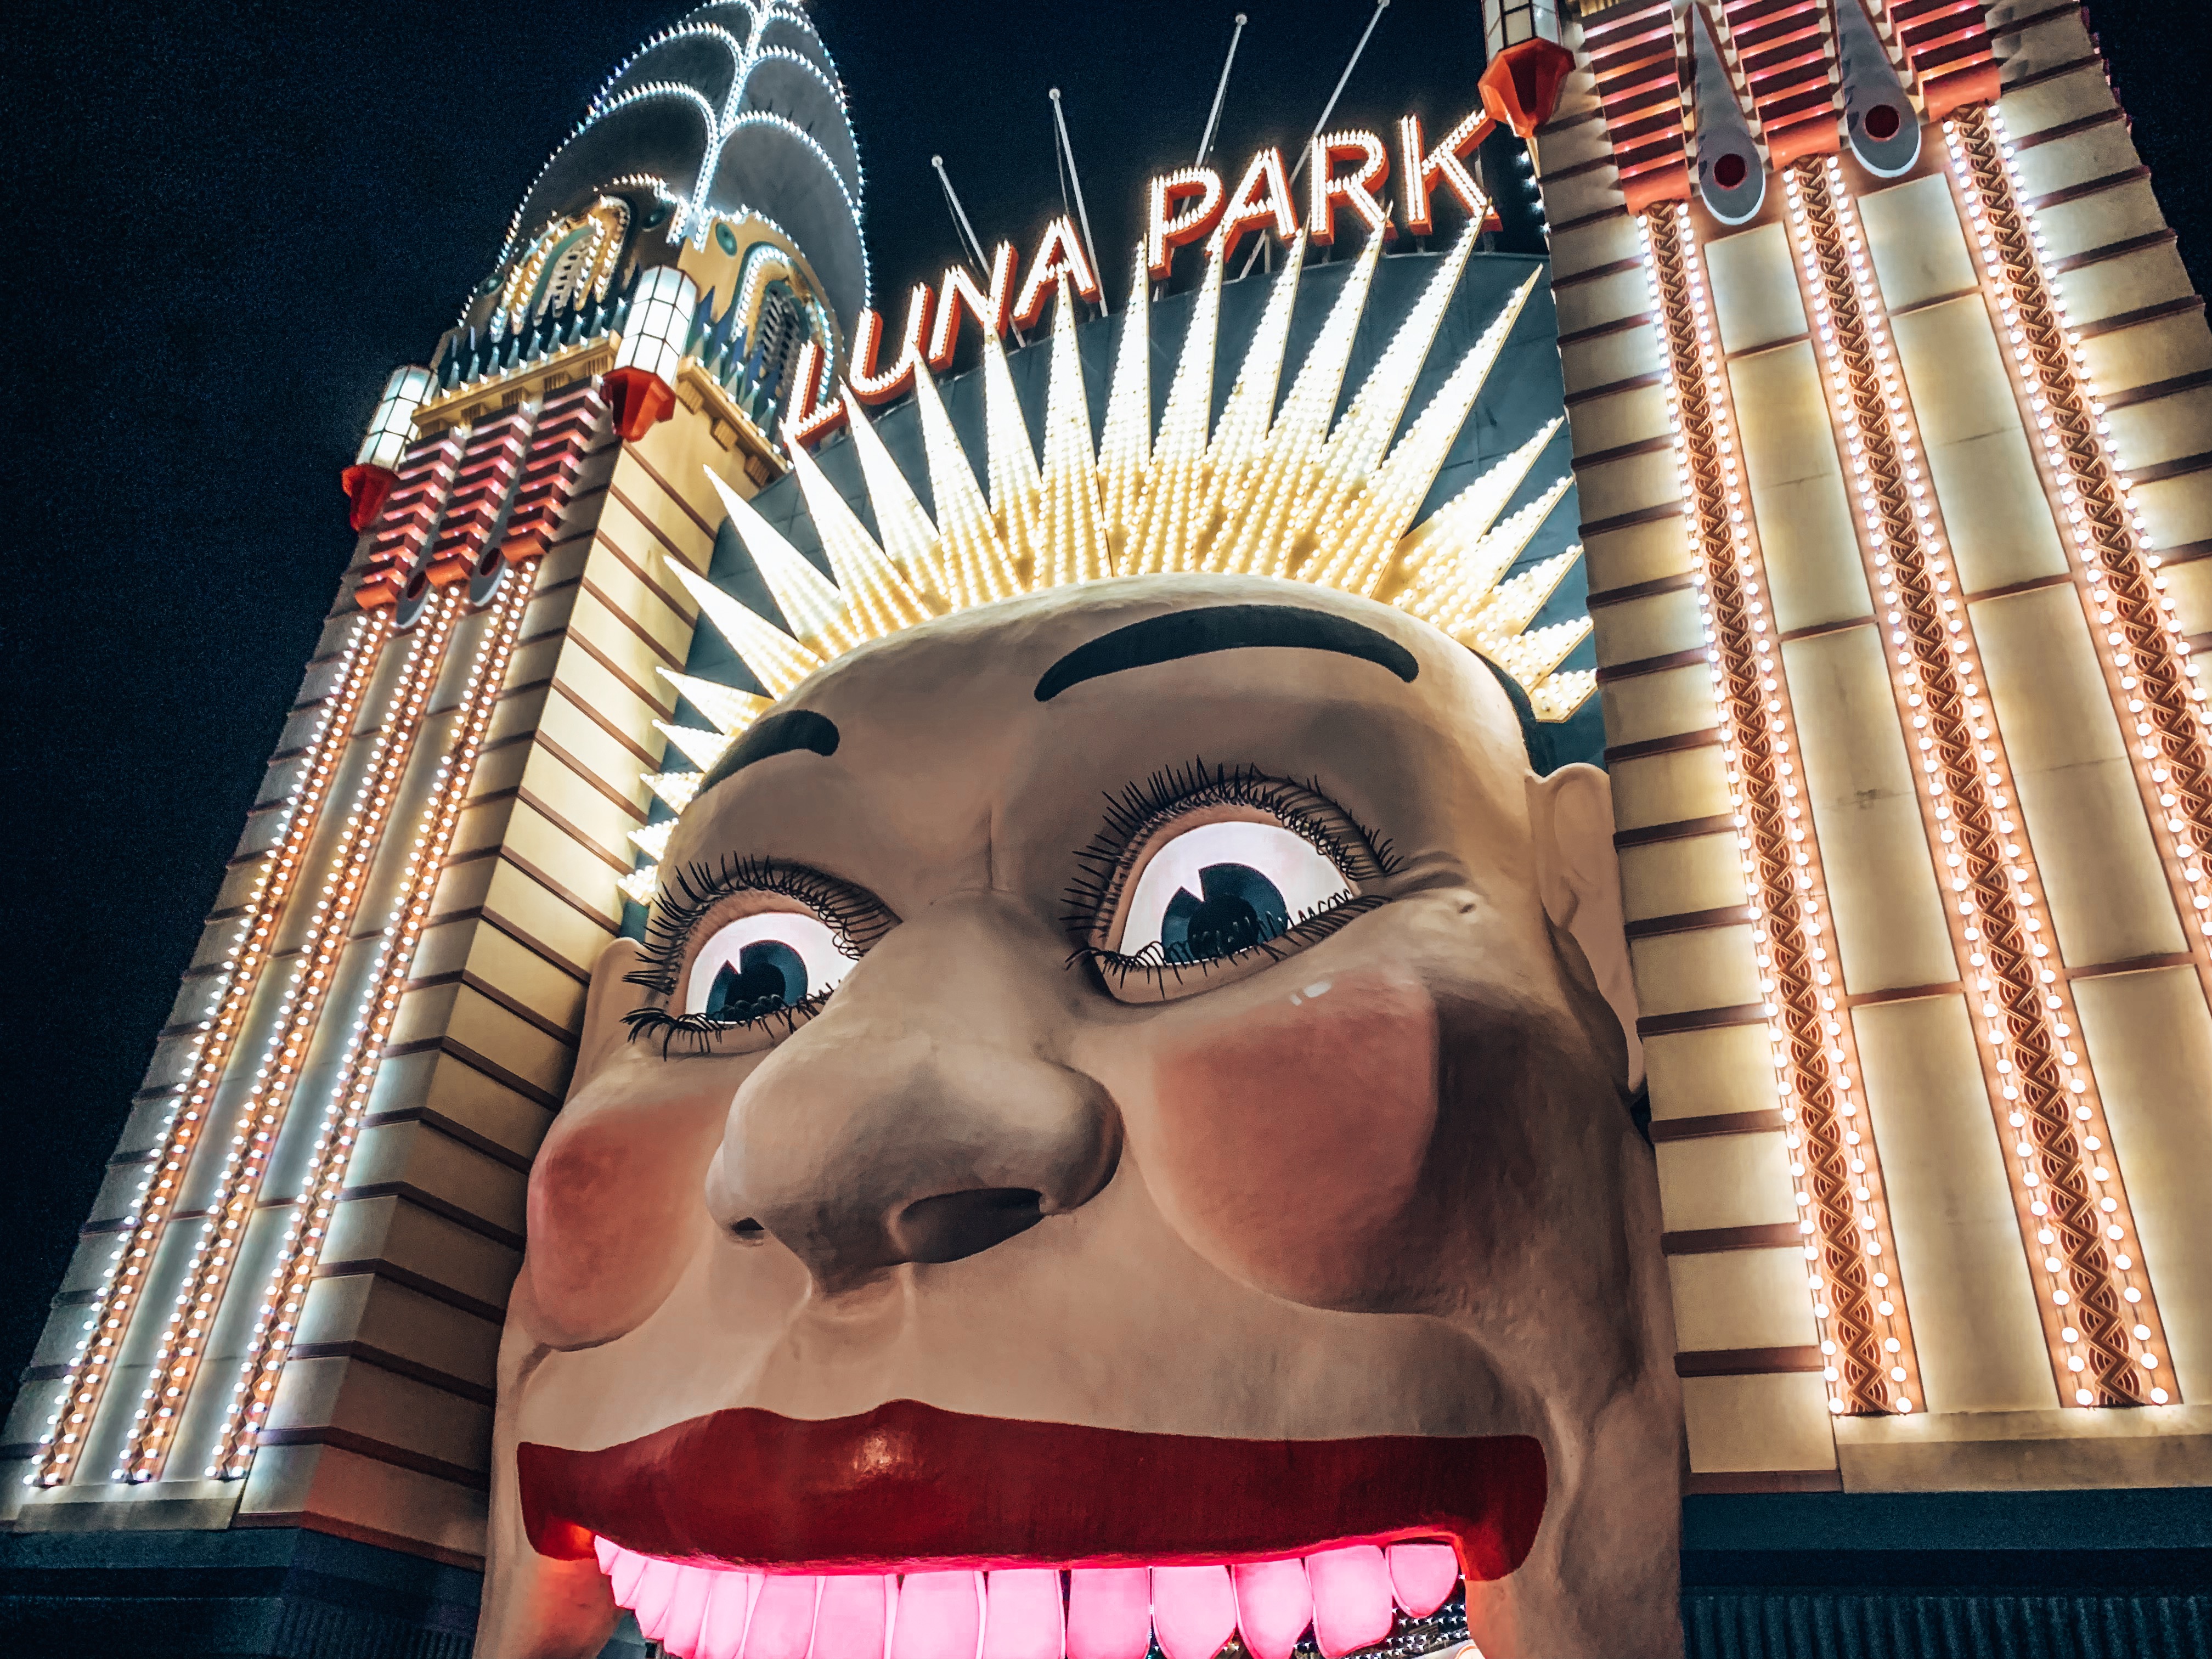 Theme park entrance of a giant smiling face figure with its mouth open as the entrance